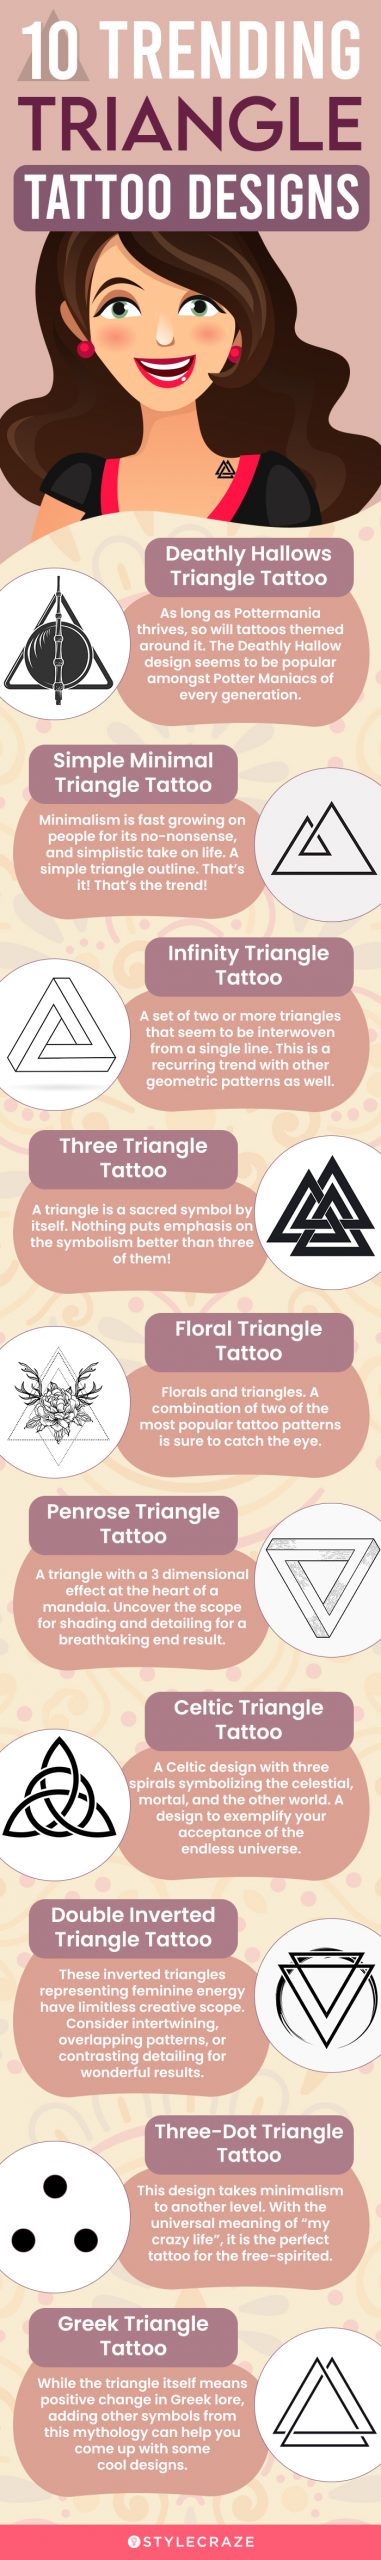 10 trending triangle tattoo designs [infographic]